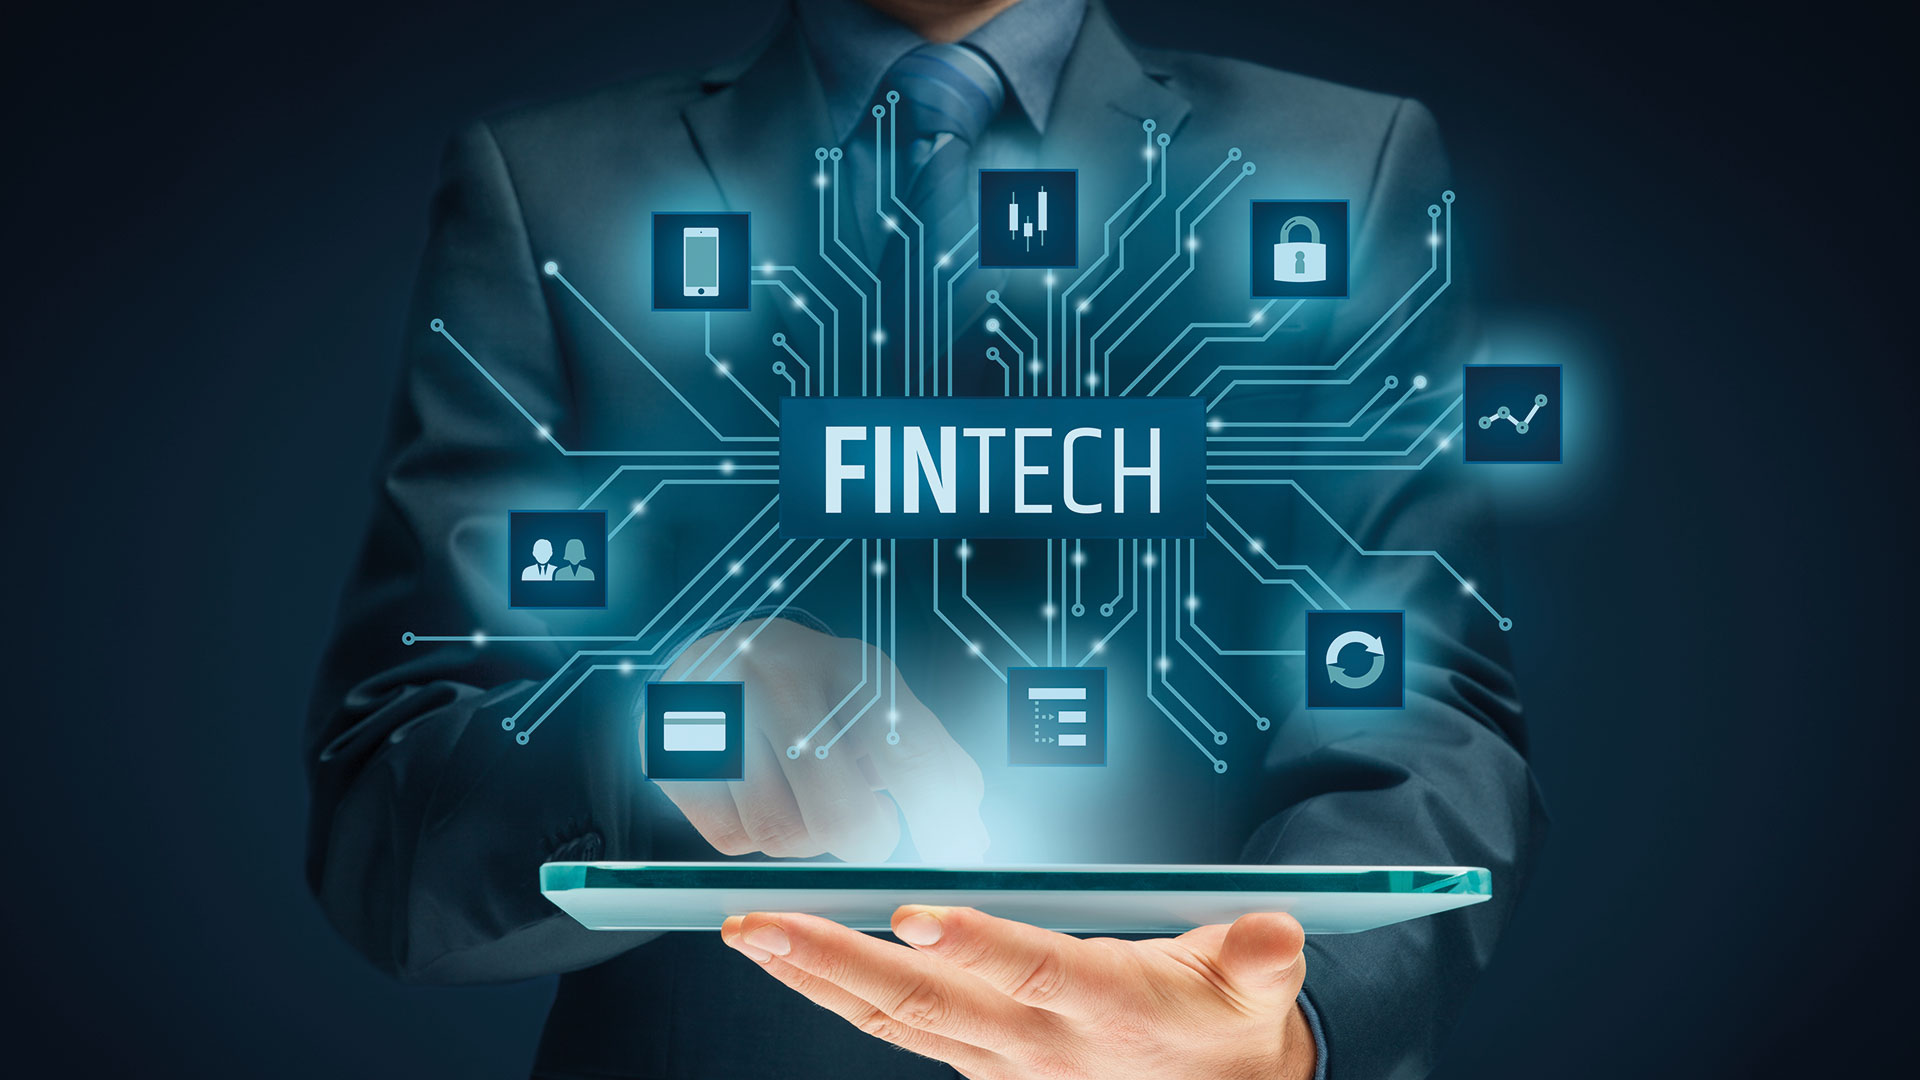 Get ready for the fintech revolution